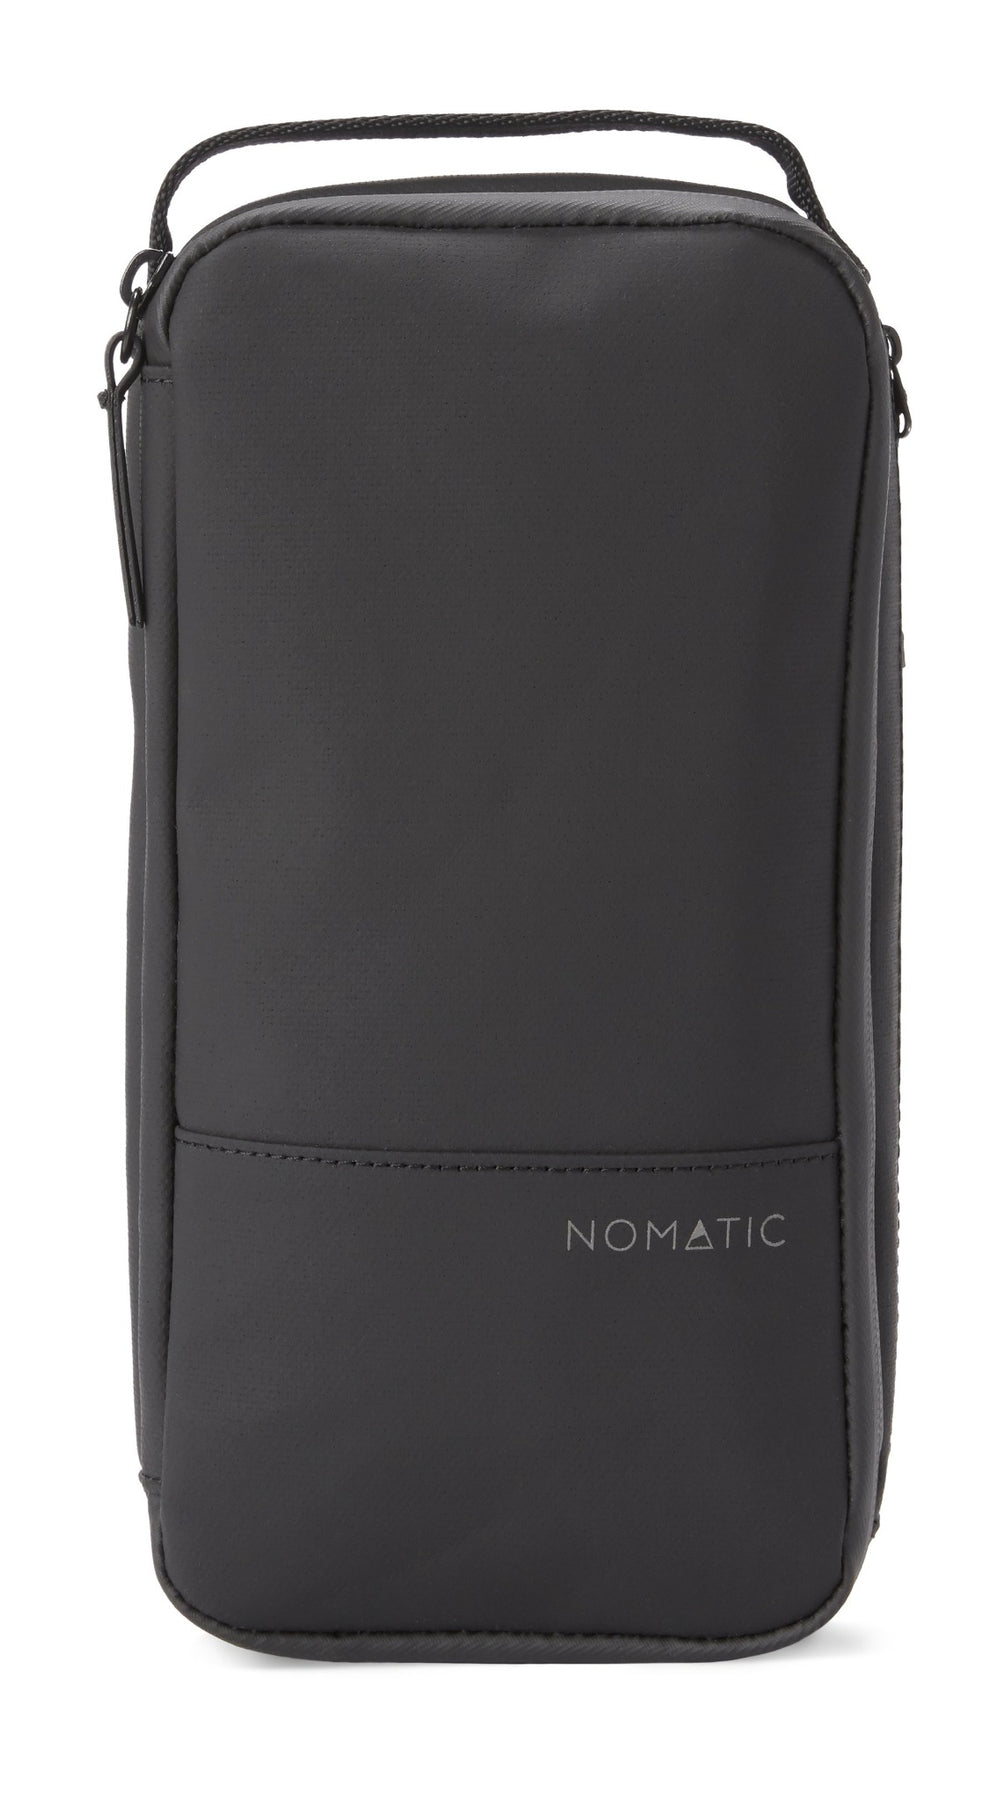 https://cdn.shopify.com/s/files/1/0268/1133/4741/products/Nomatic_Toiletry_Sm_Front_20190702_1800x1800.jpg?v=1591729204